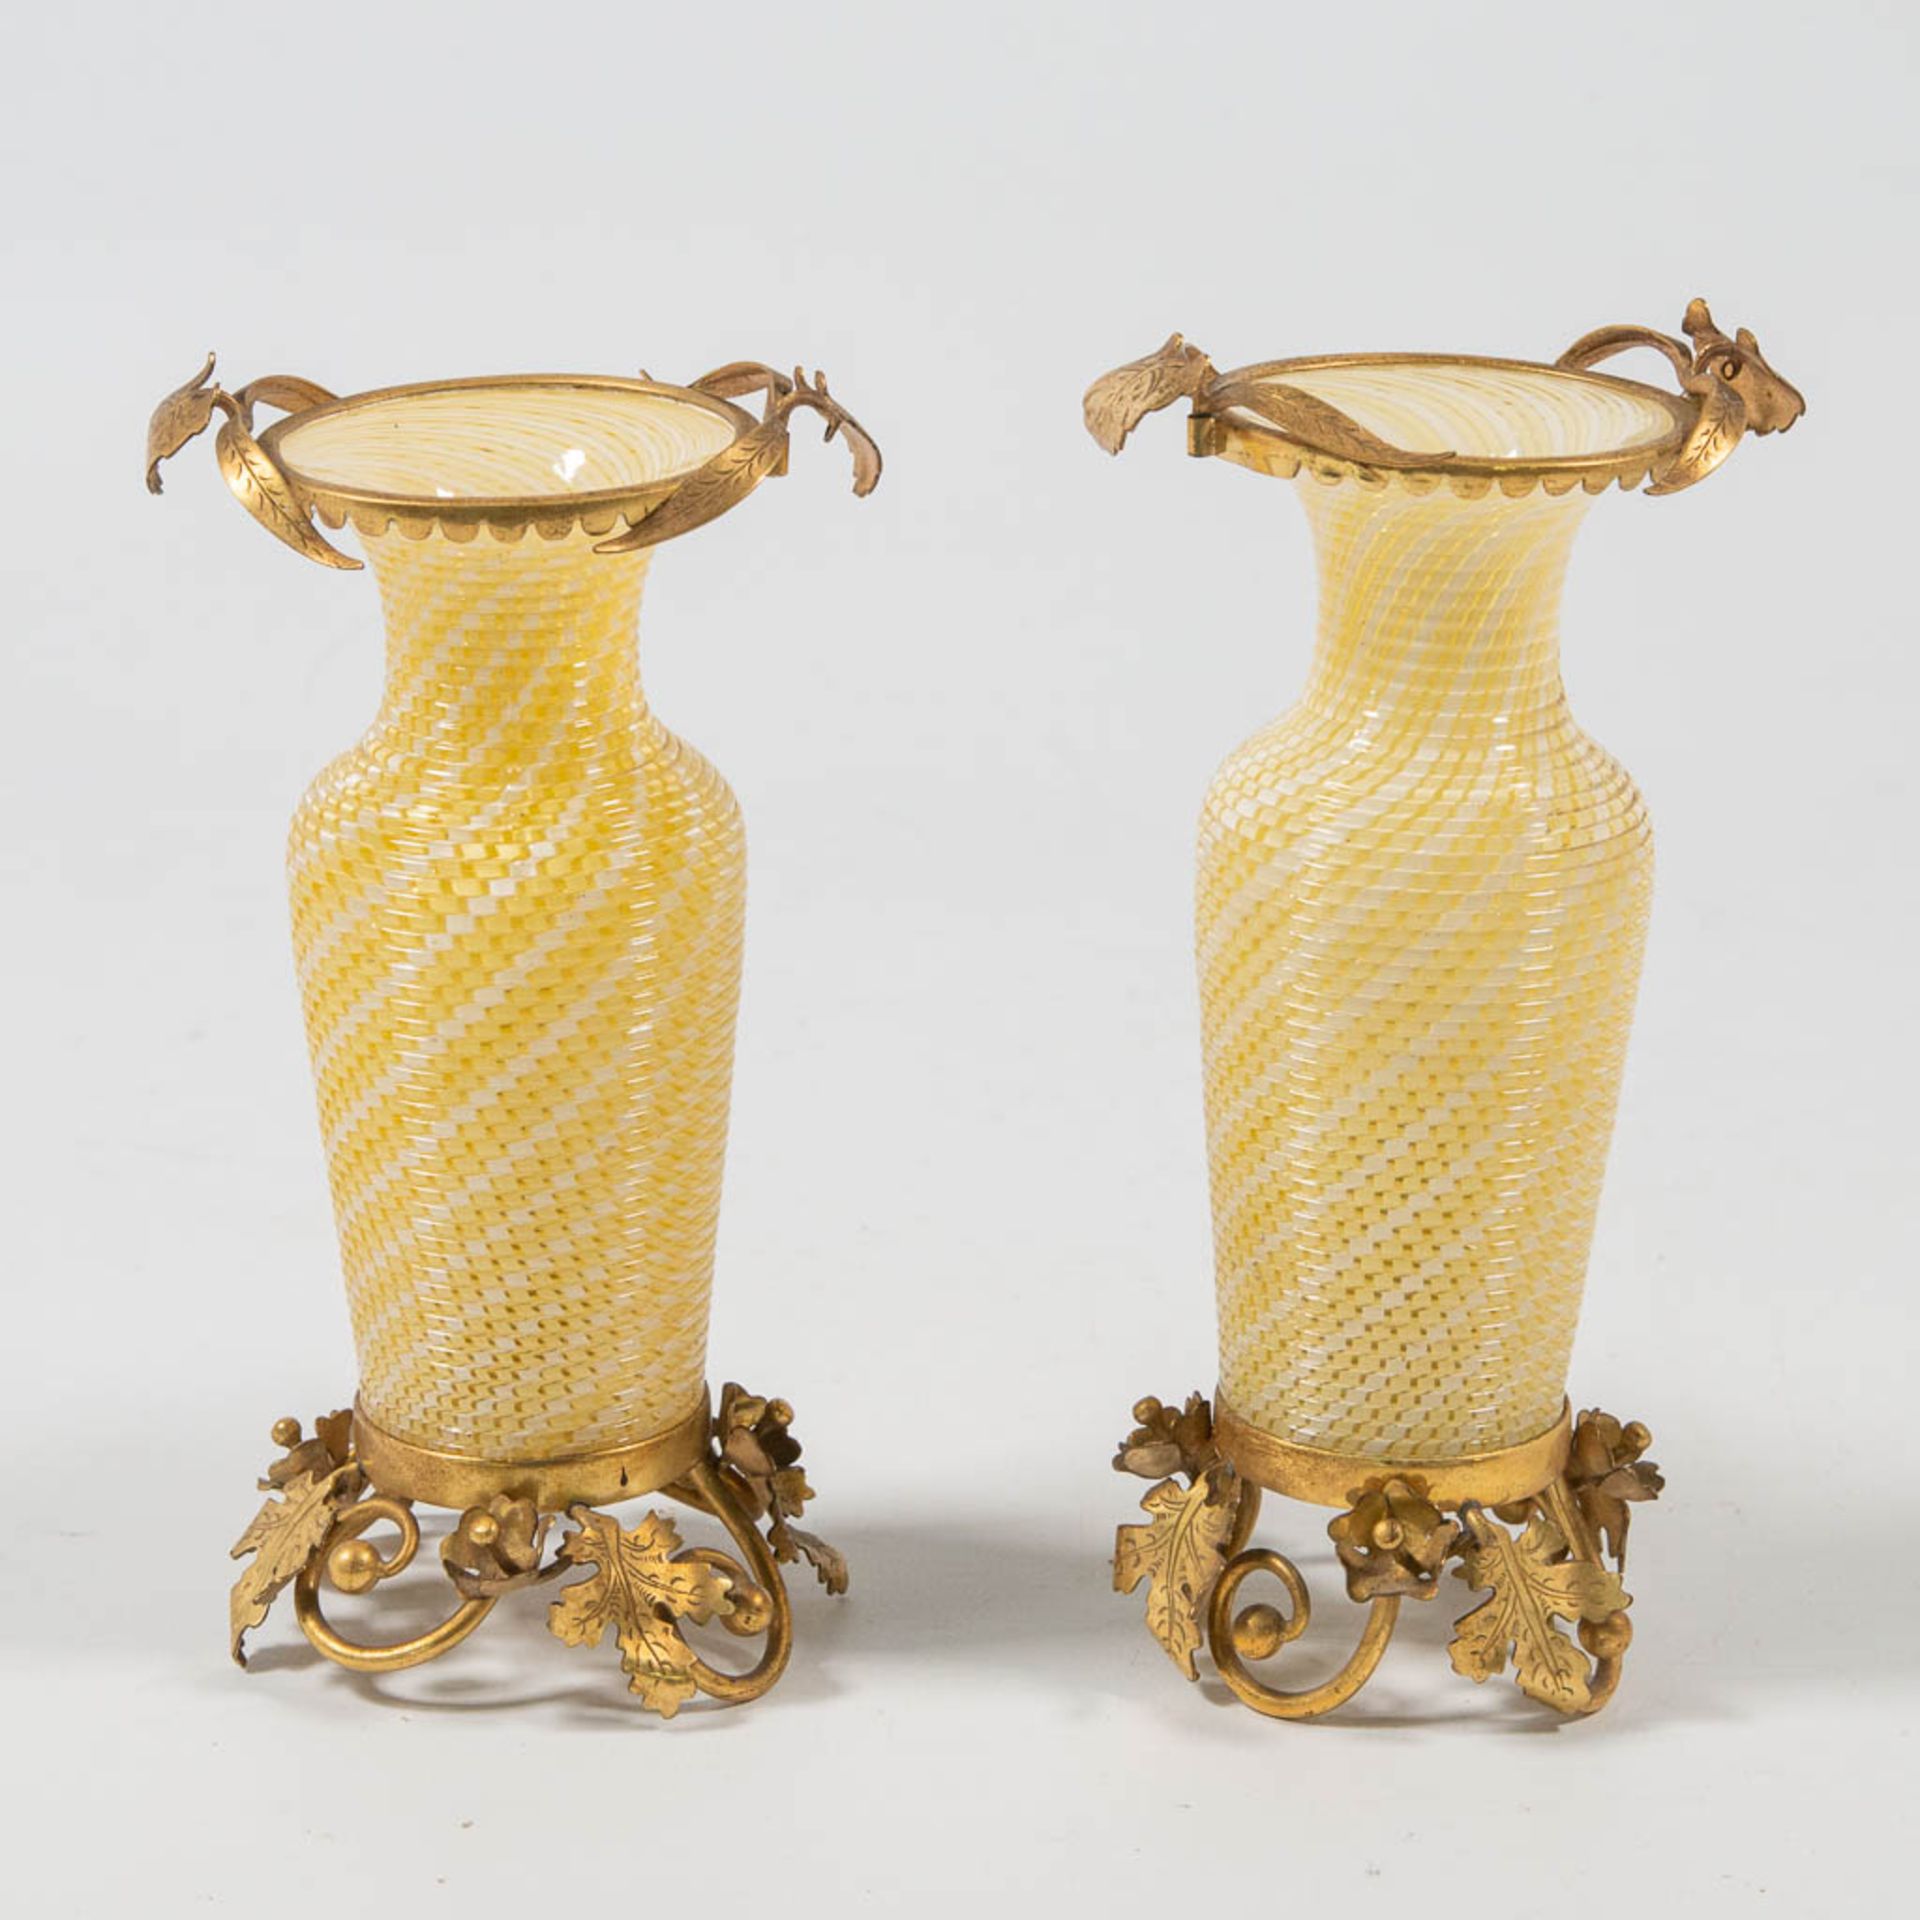 A pair of vases made of glass and mounted with bronze, made in Murano, Italy around 1900. (16 x 6,5